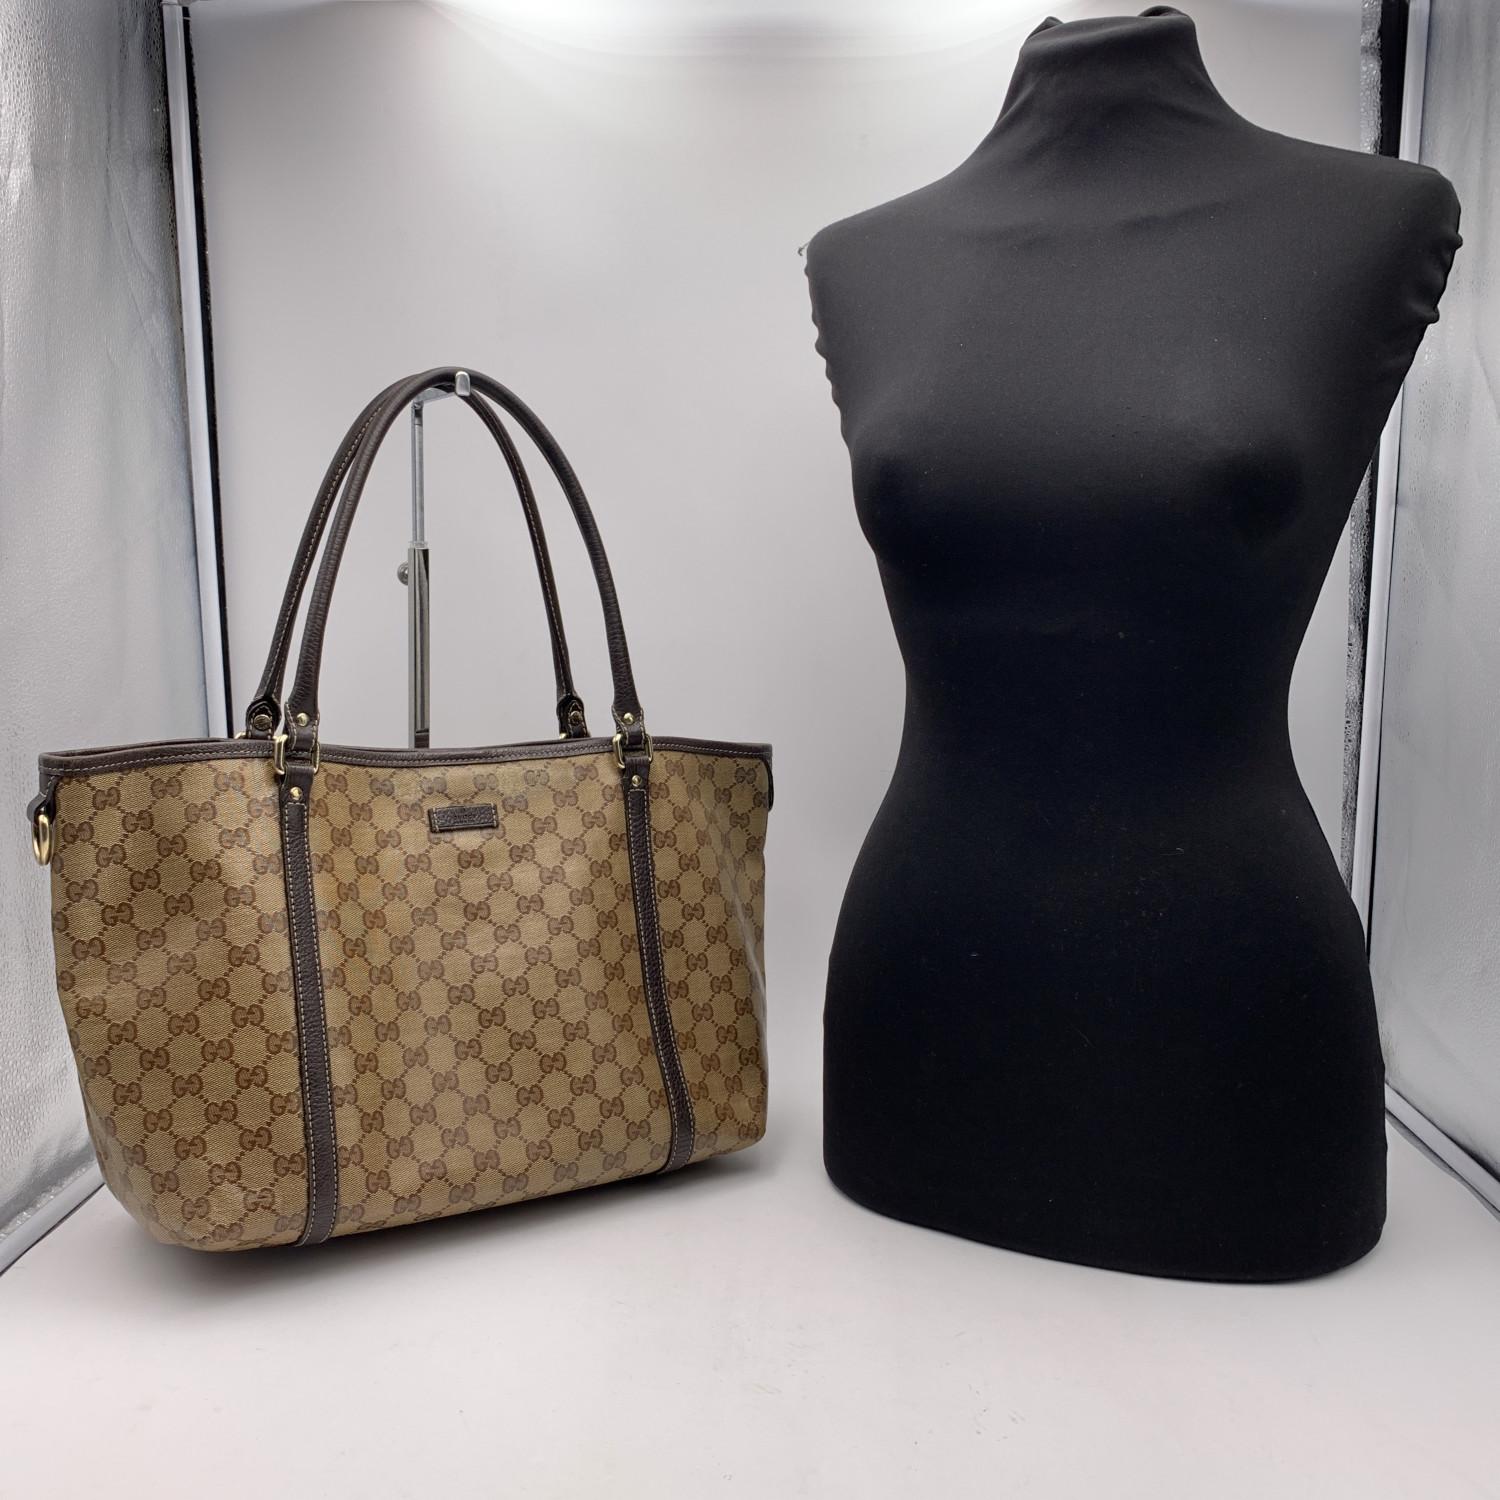 Gucci tote crafted in brown monogram Crystal canvas with brown genuine leather trim and handles. Light gold hardware. Magnetic button closure on top. Inside,brown fabric lining with 1 side open pocket. 'GUCCI - made in italy' tag inside (with serial